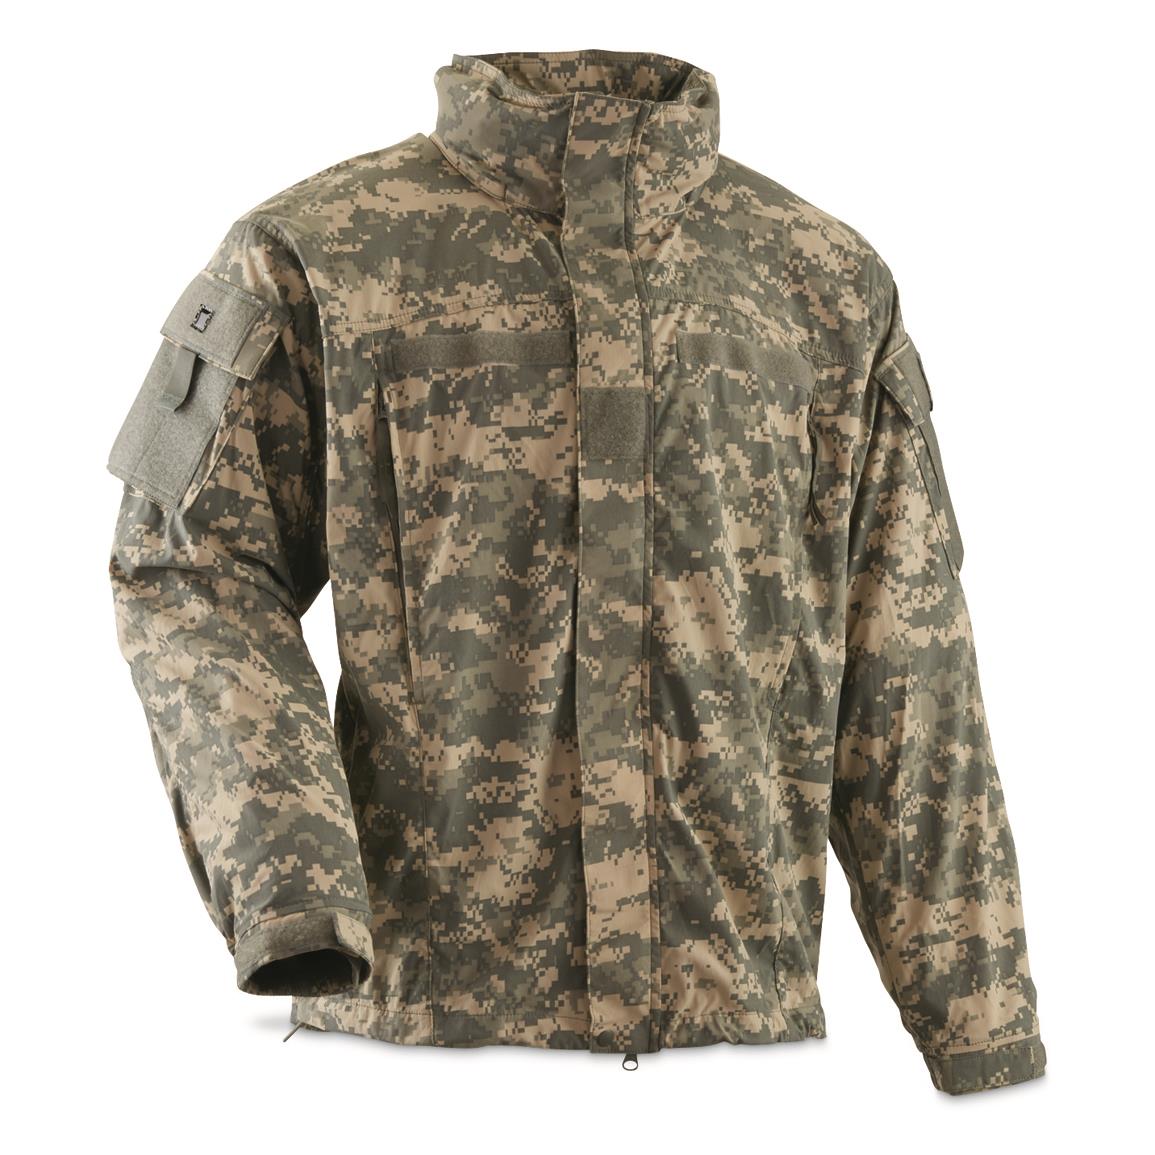 Army Military Jacket | Sportsman's Guide